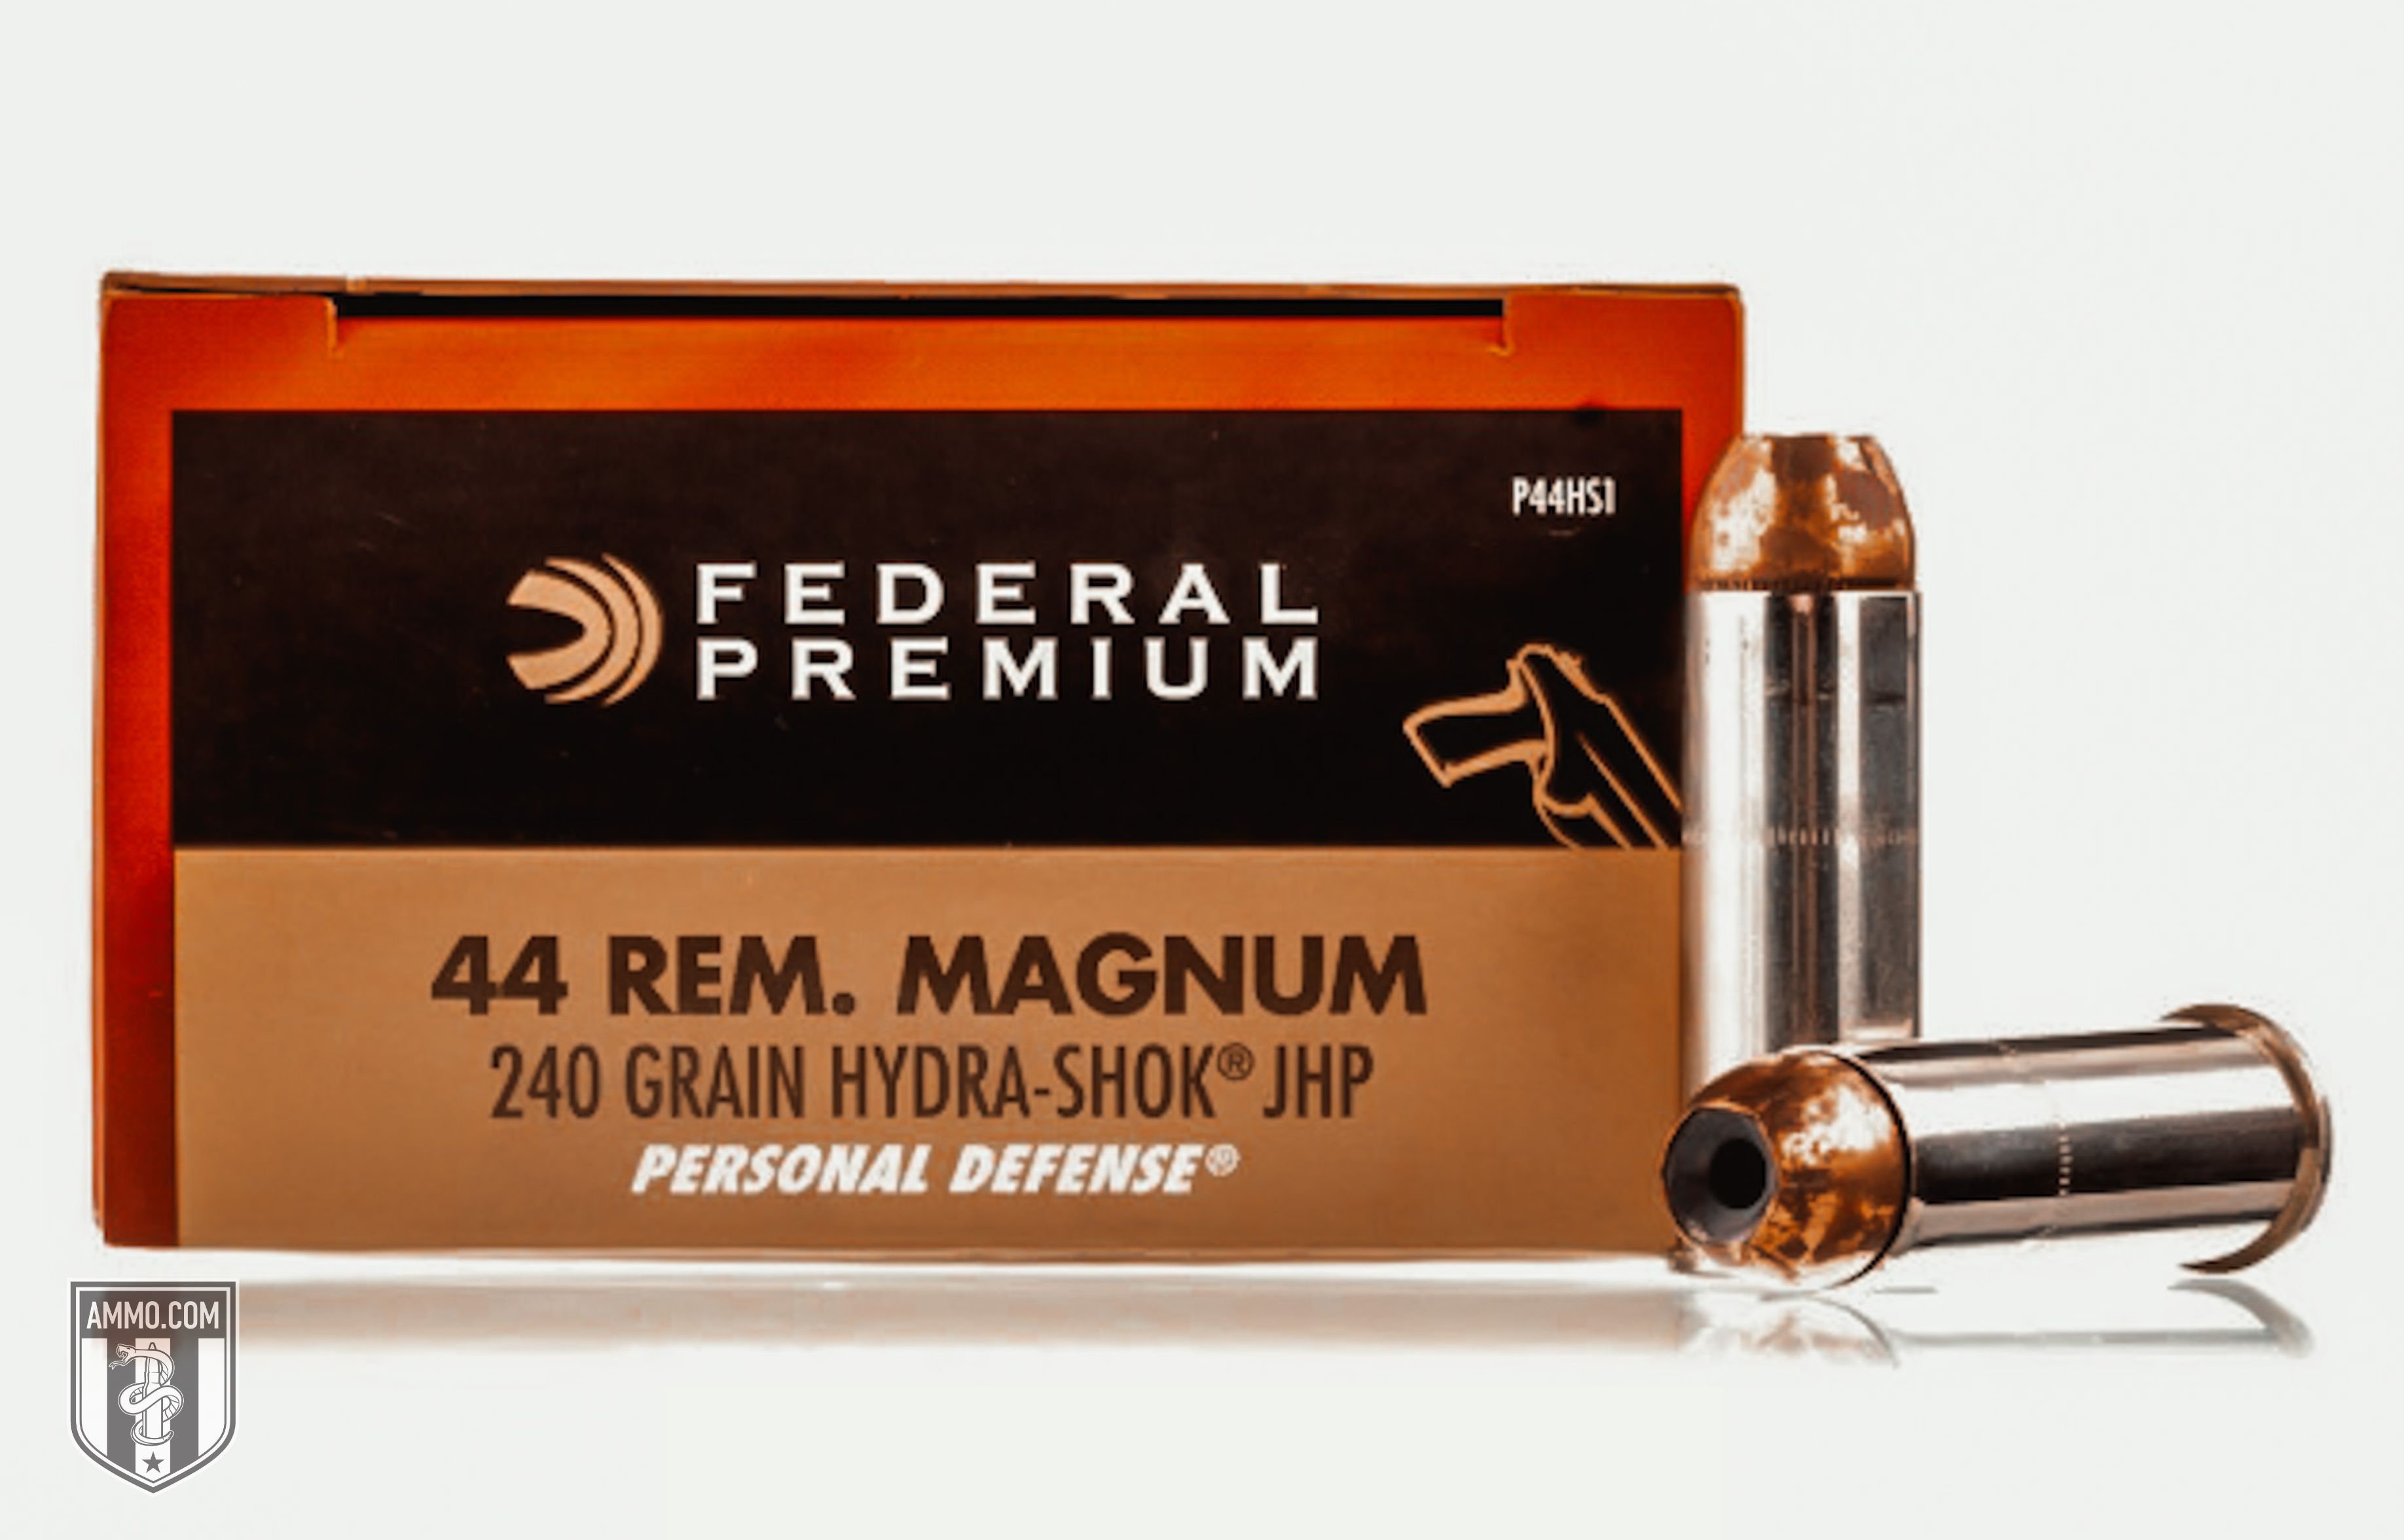 Federal 44 Magnum ammo for sale